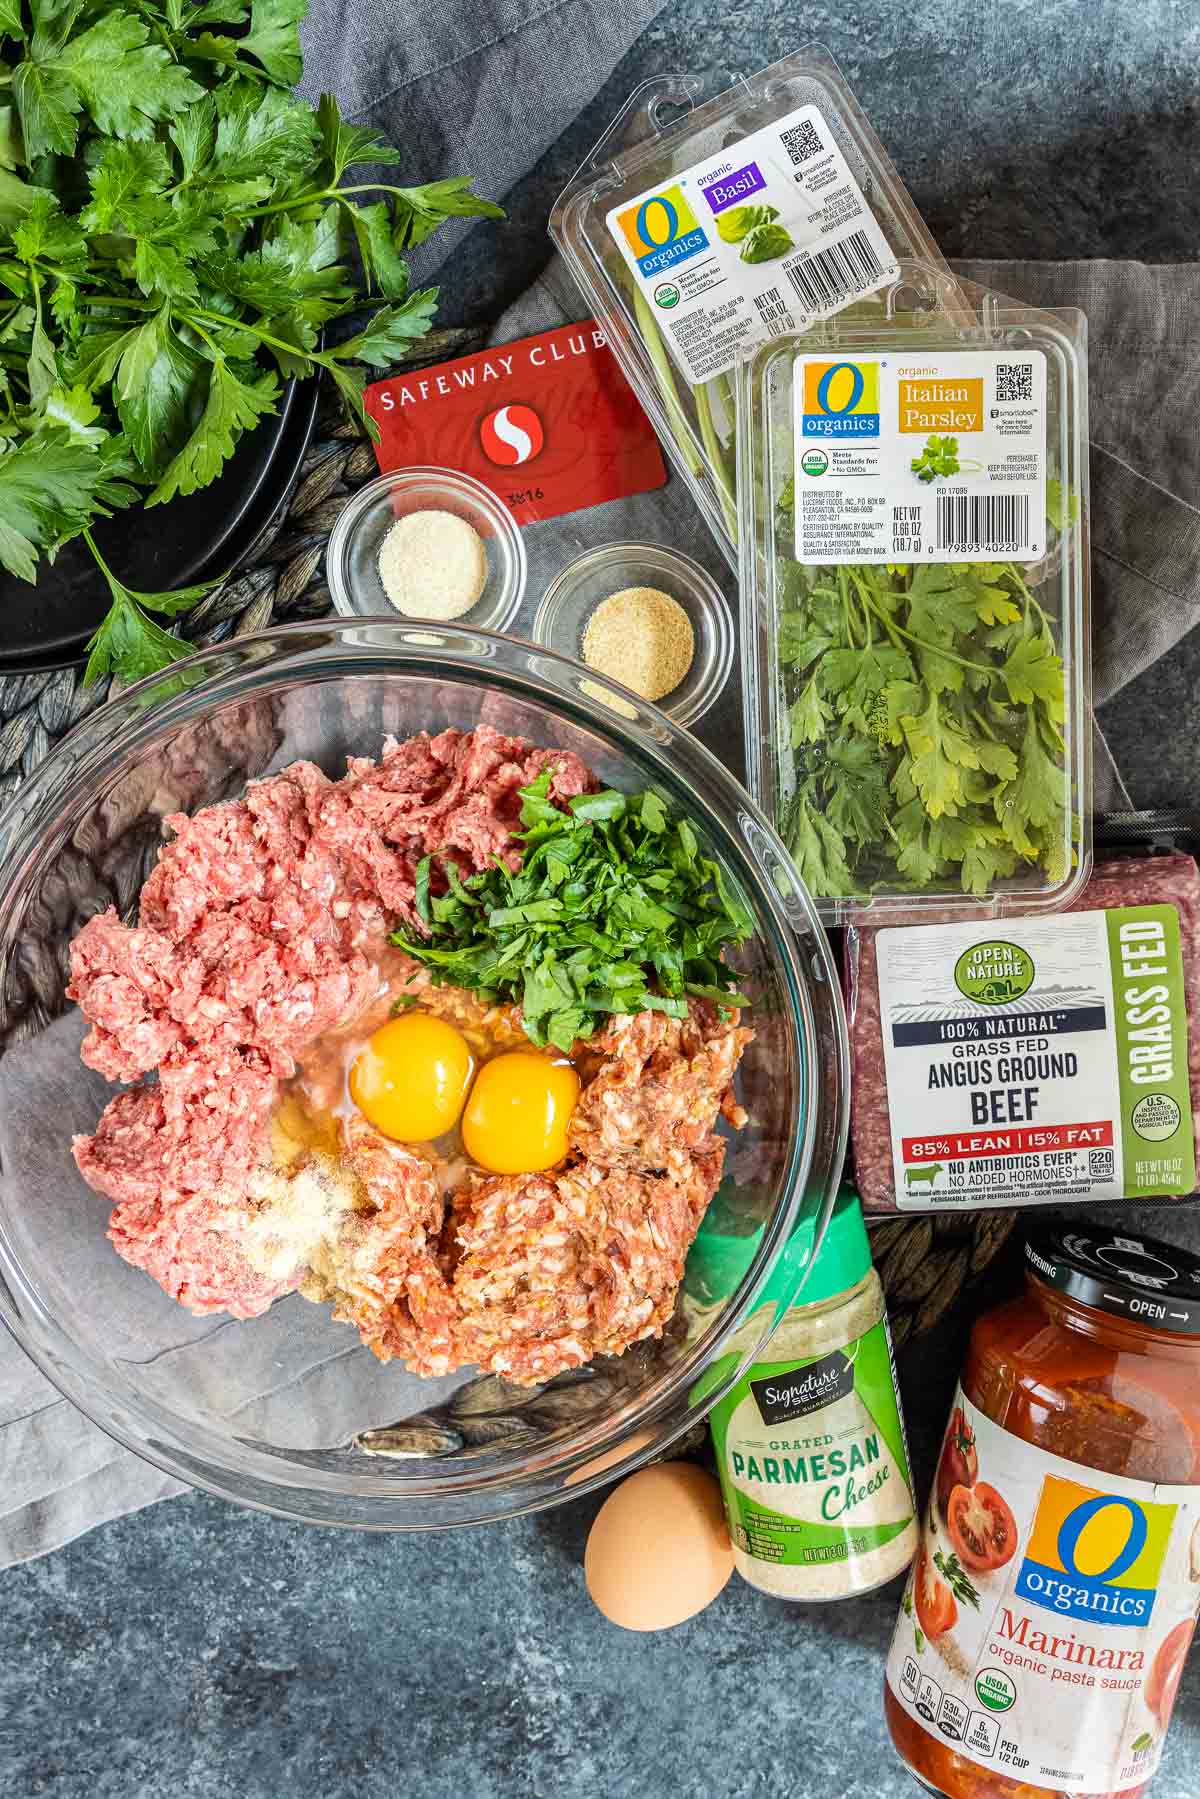 ingredients for Instant Pot Meatballs from Safeway